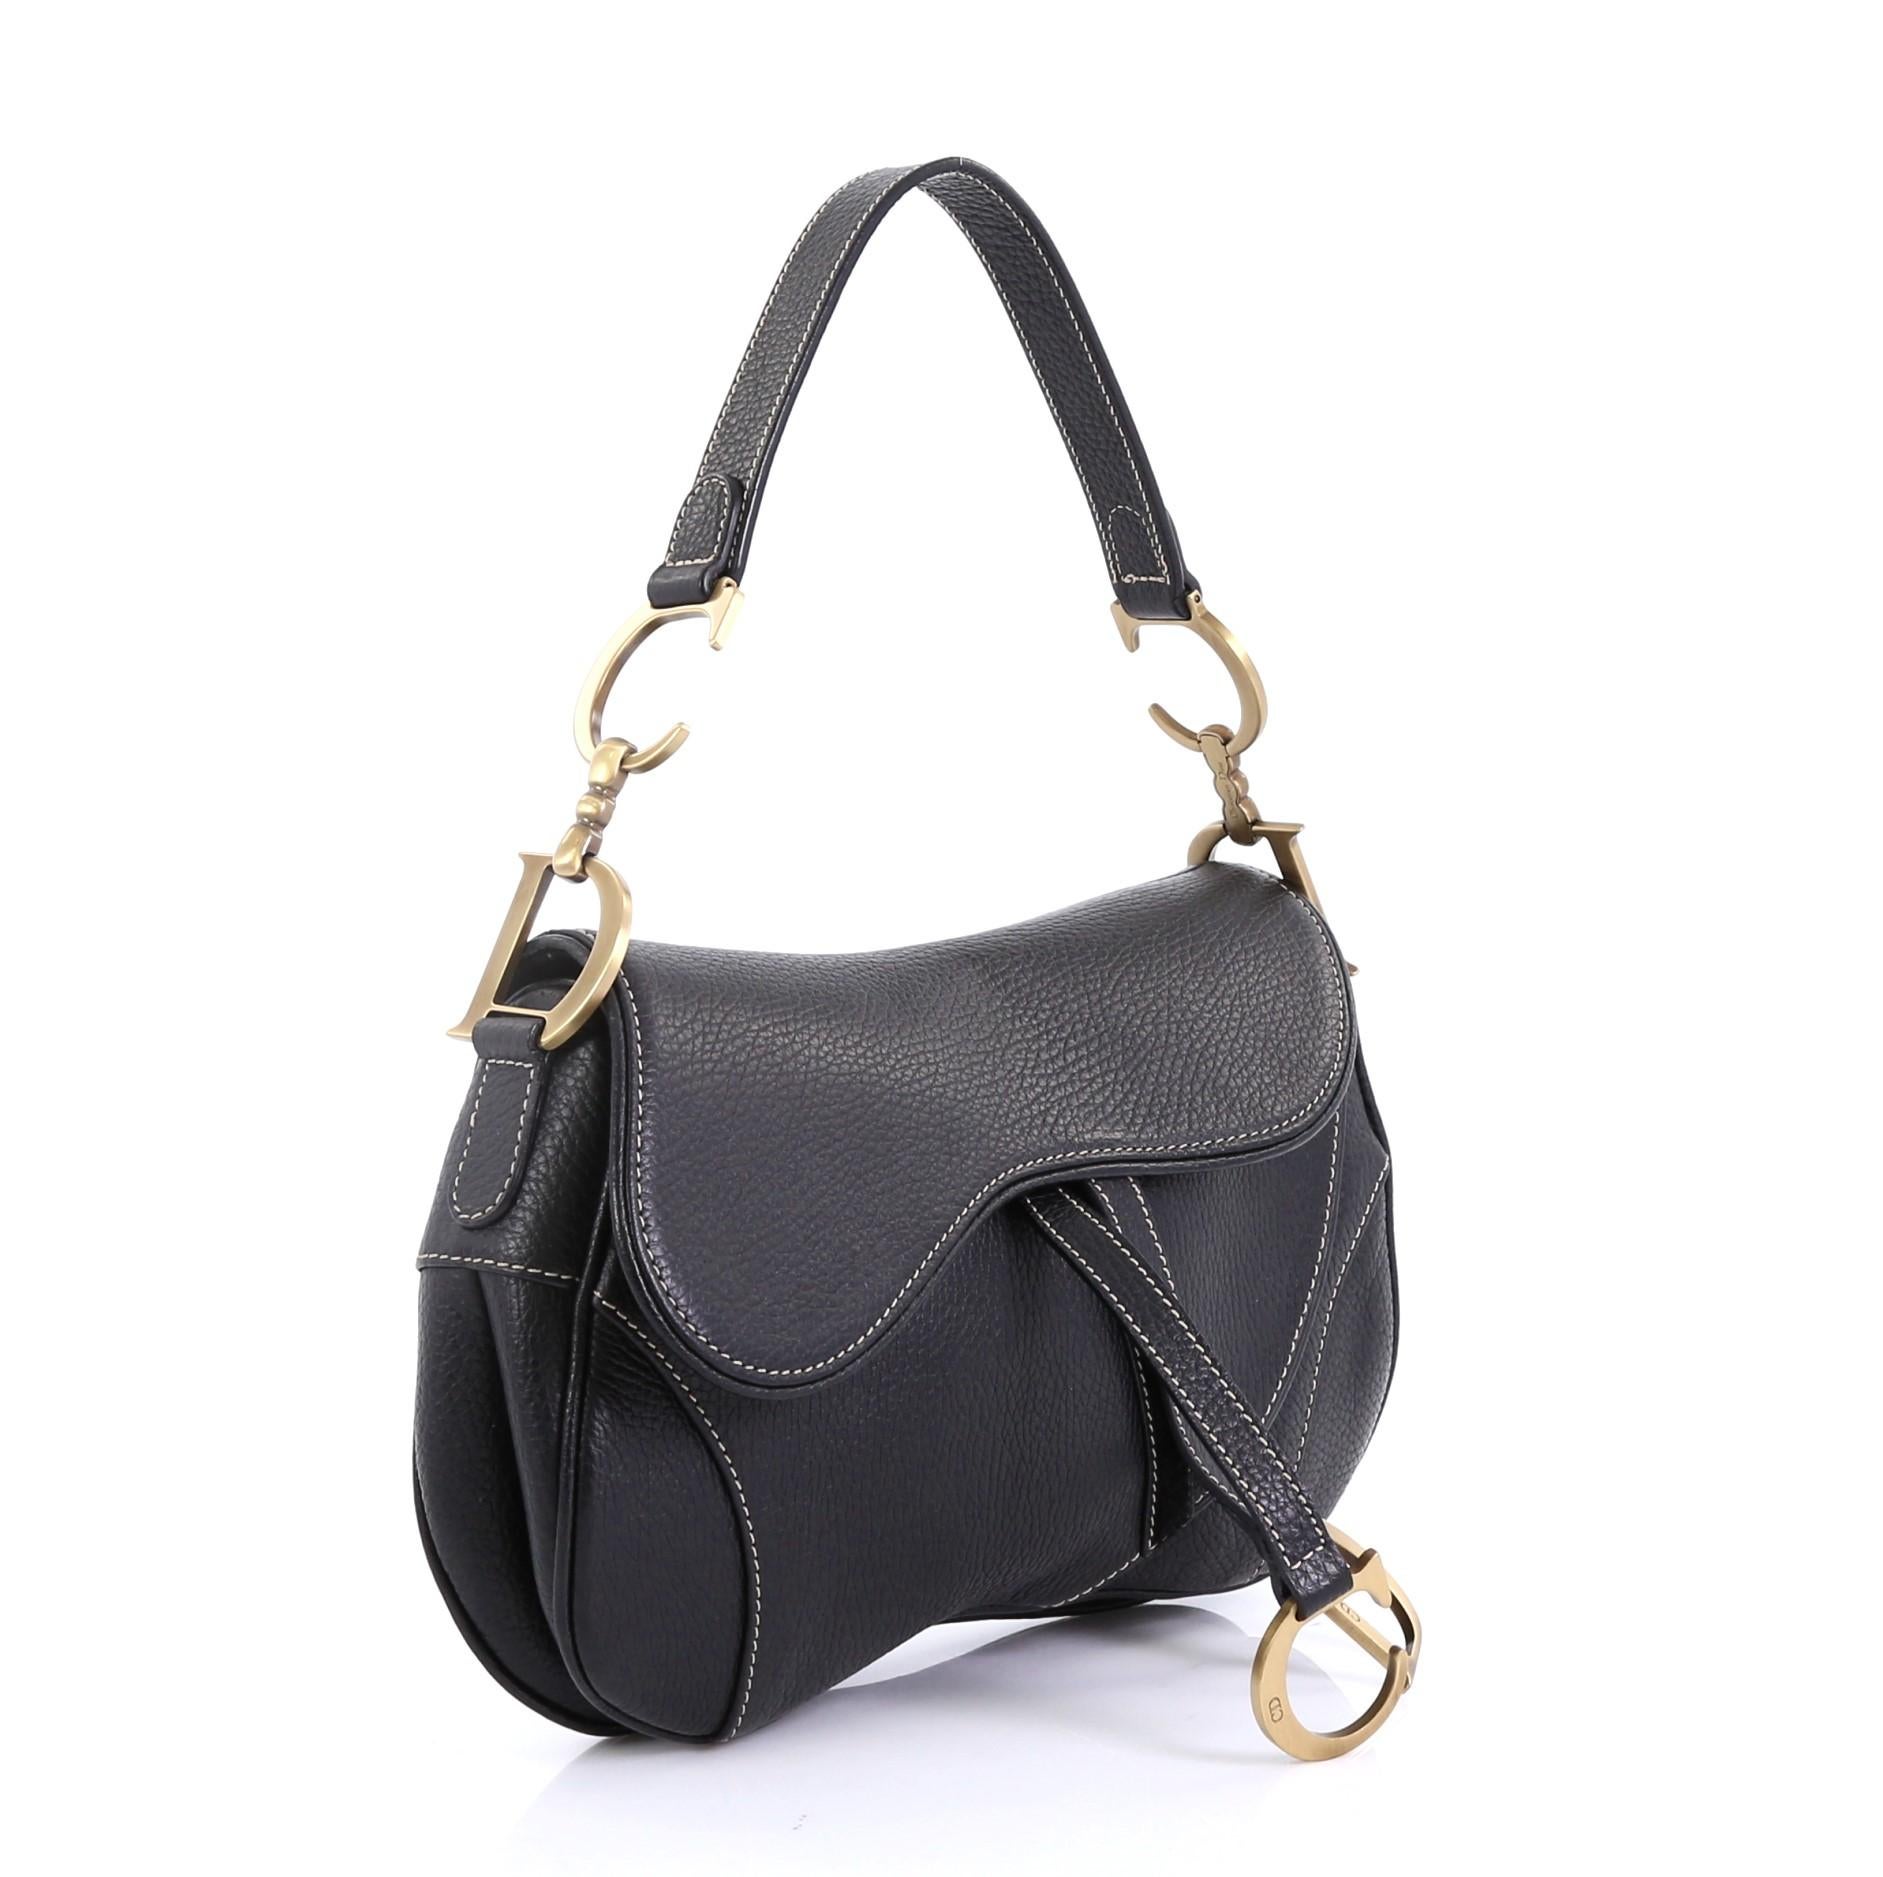 This Christian Dior Vintage Double Saddle Bag Leather, crafted from black leather, features a top handle adorned with metal 'CD' finishing and aged gold-tone hardware. Its fold over top opens to a black fabric interior with zip pocket. 

Condition: